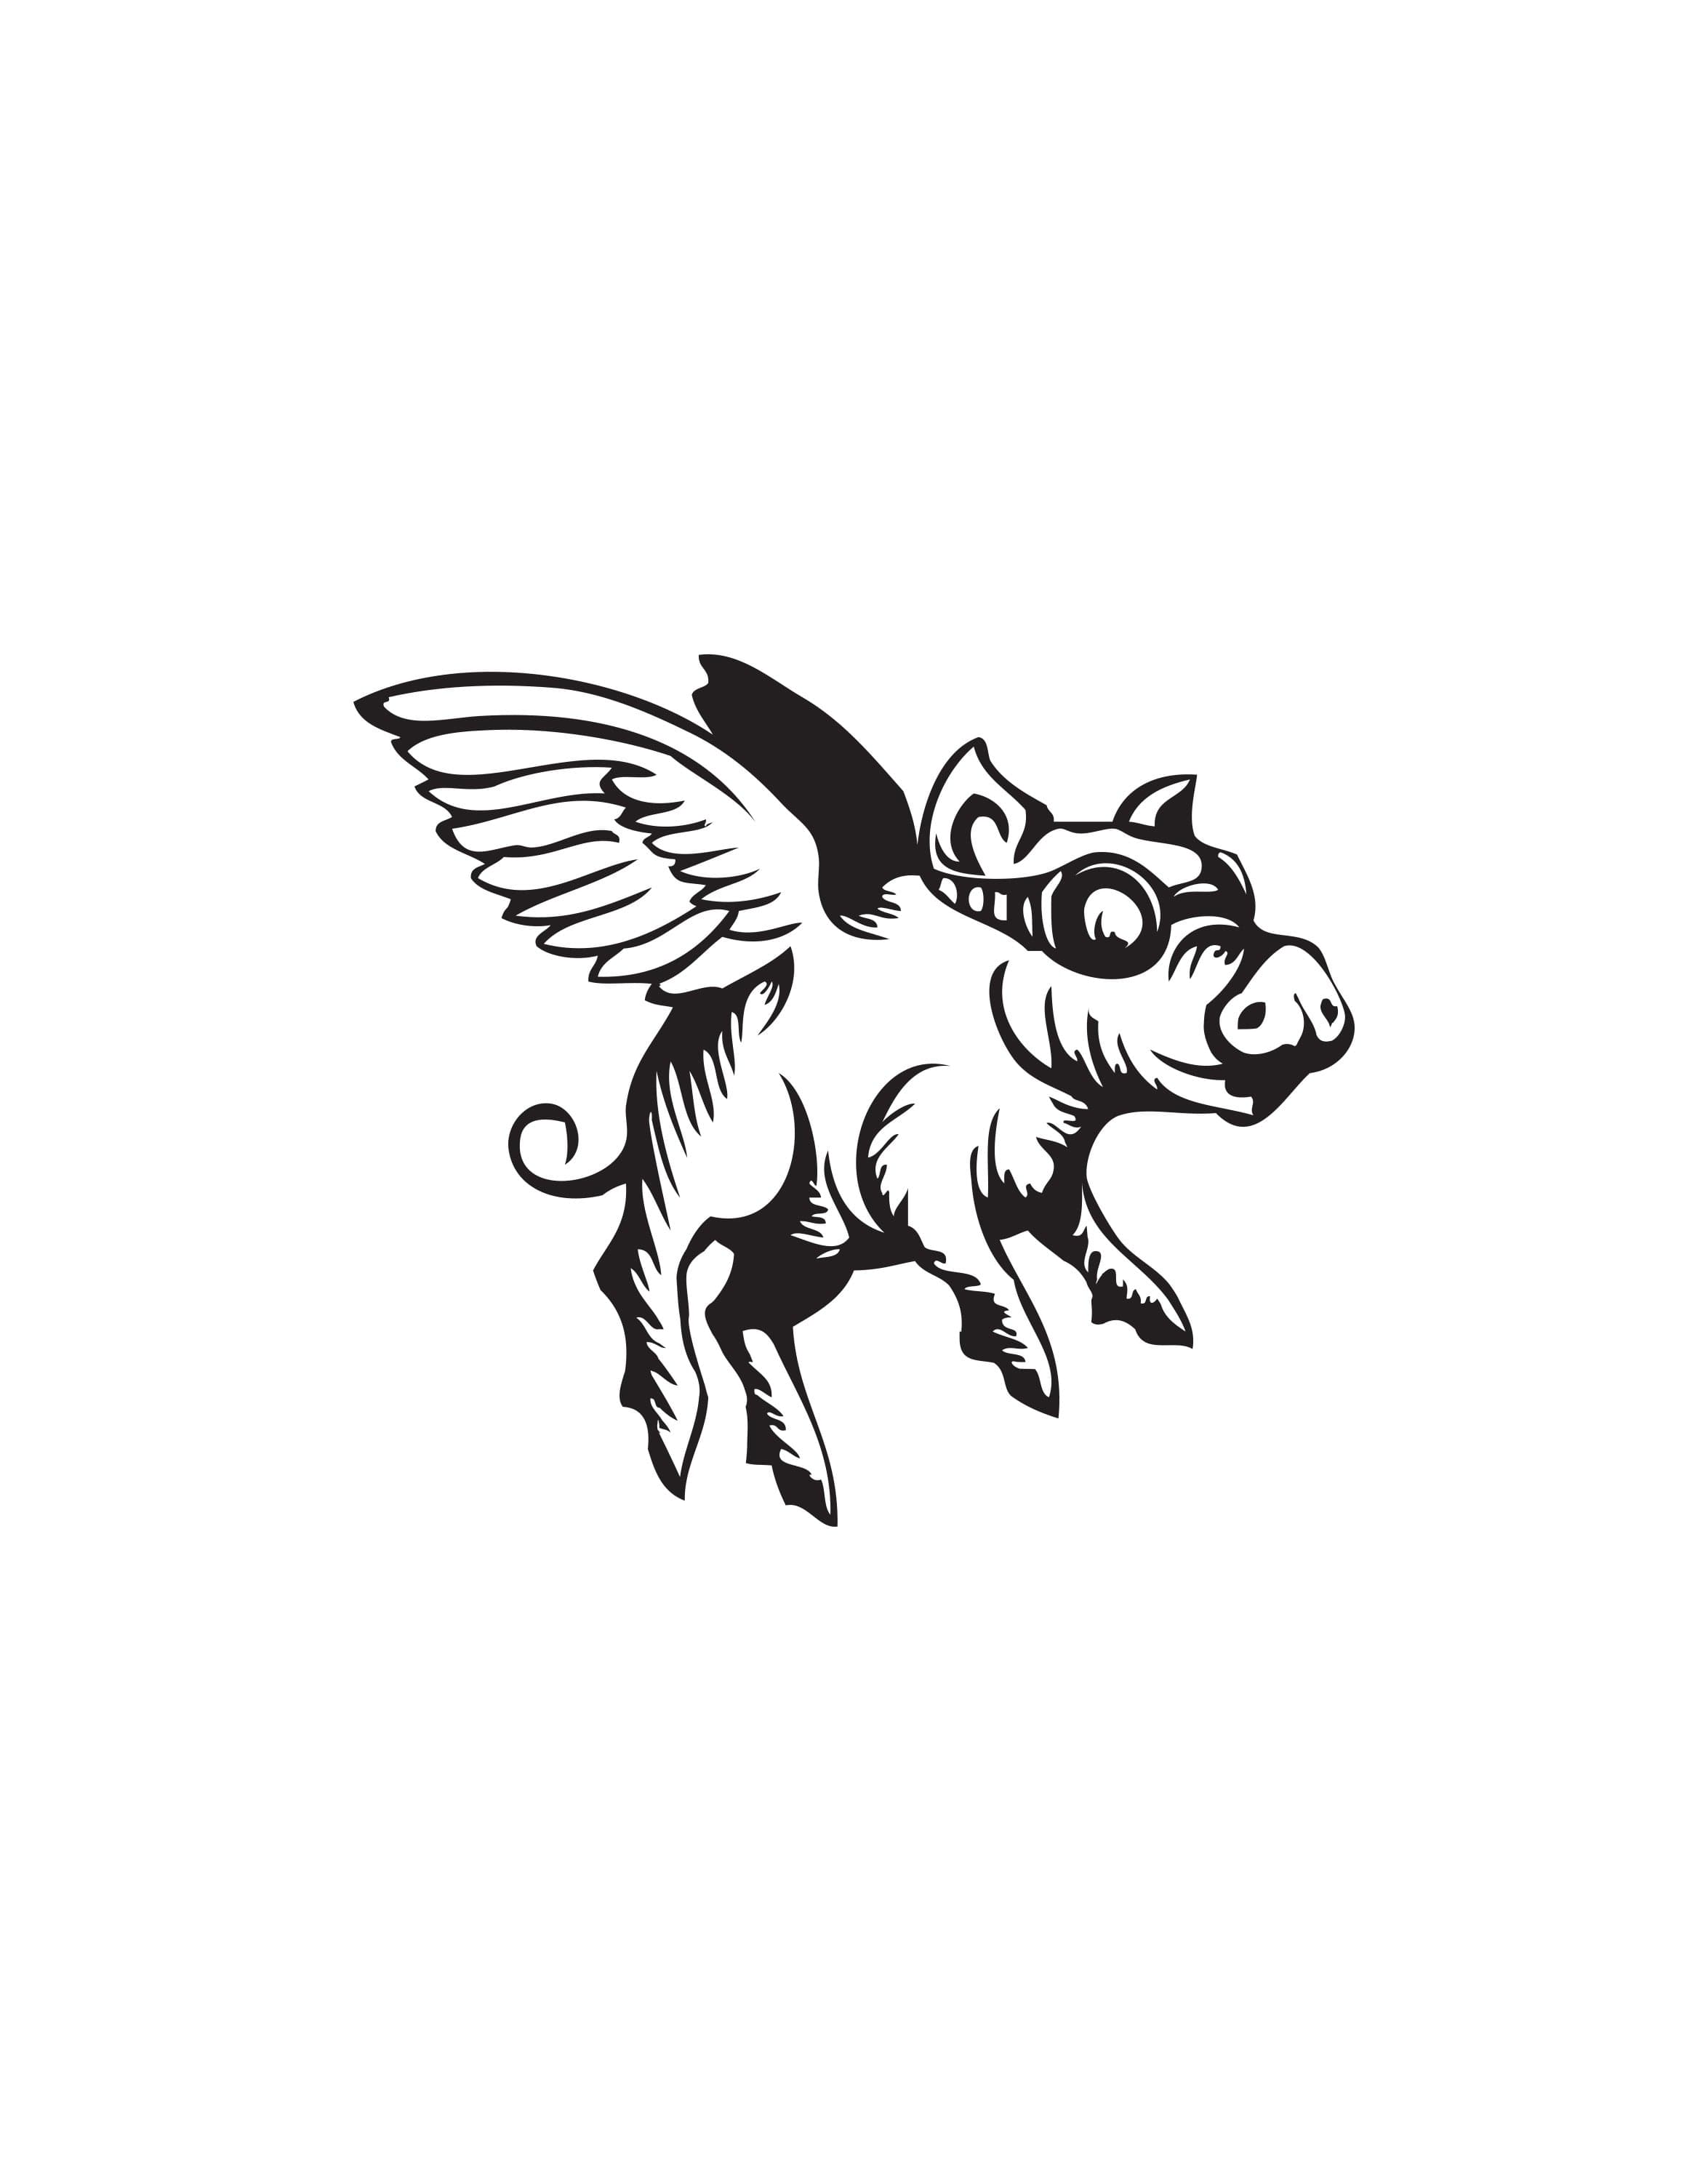 Amazon.com : Flying Pig Temporary Tattoo Sticker (Set of 2) - OhMyTat :  Beauty & Personal Care